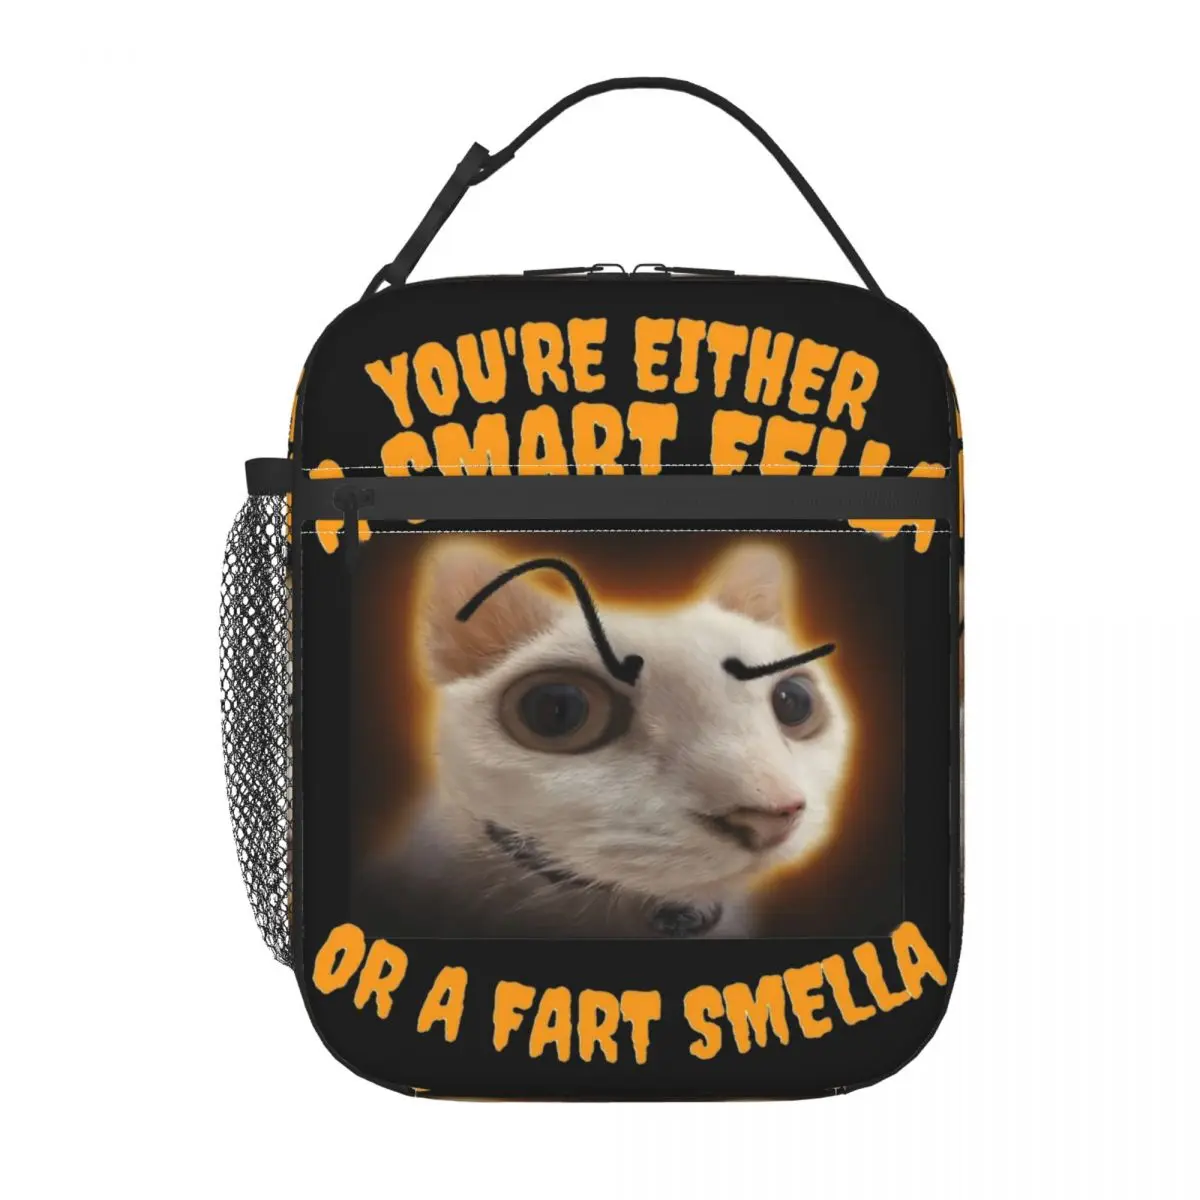 Insulated Lunch Boxes You're A Smart Fella Or A Fart Smella Funny Cartoon Food Box Fashion Cooler Thermal Lunch Box For School